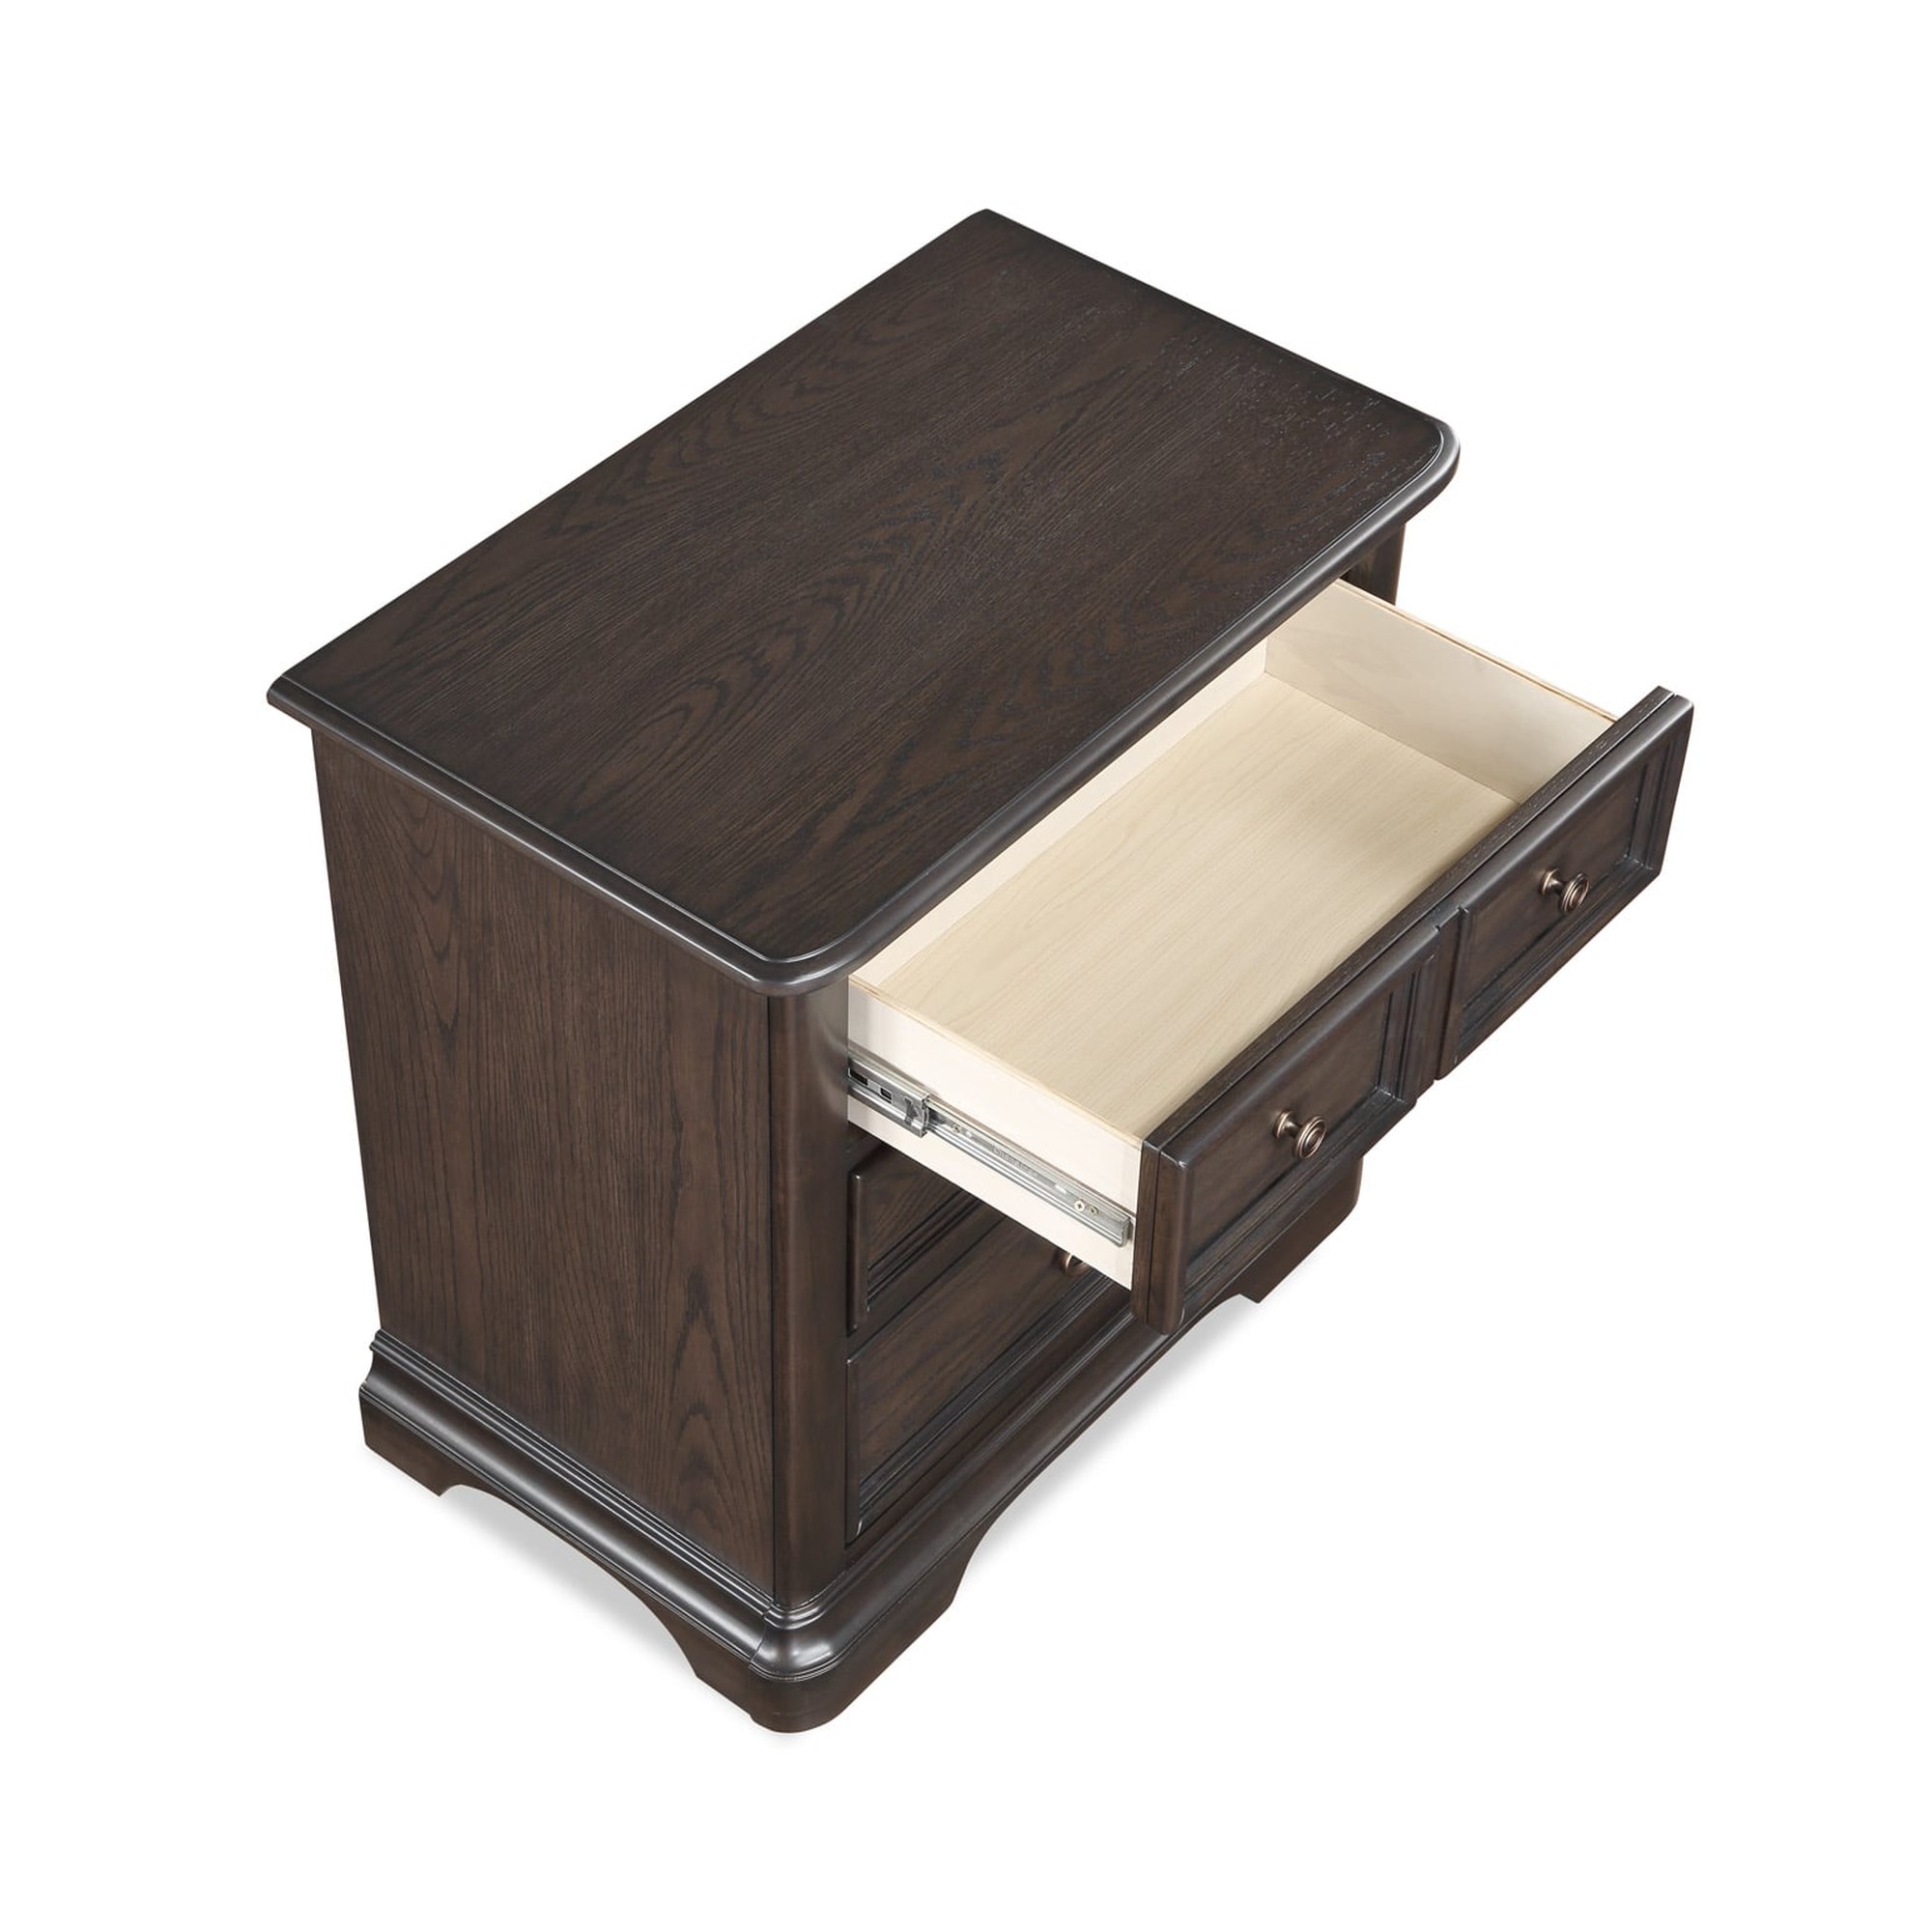 Crown Mark Stanley B1600-2 Traditional 3-Drawer Nightstand with Marble Top, A1 Furniture & Mattress